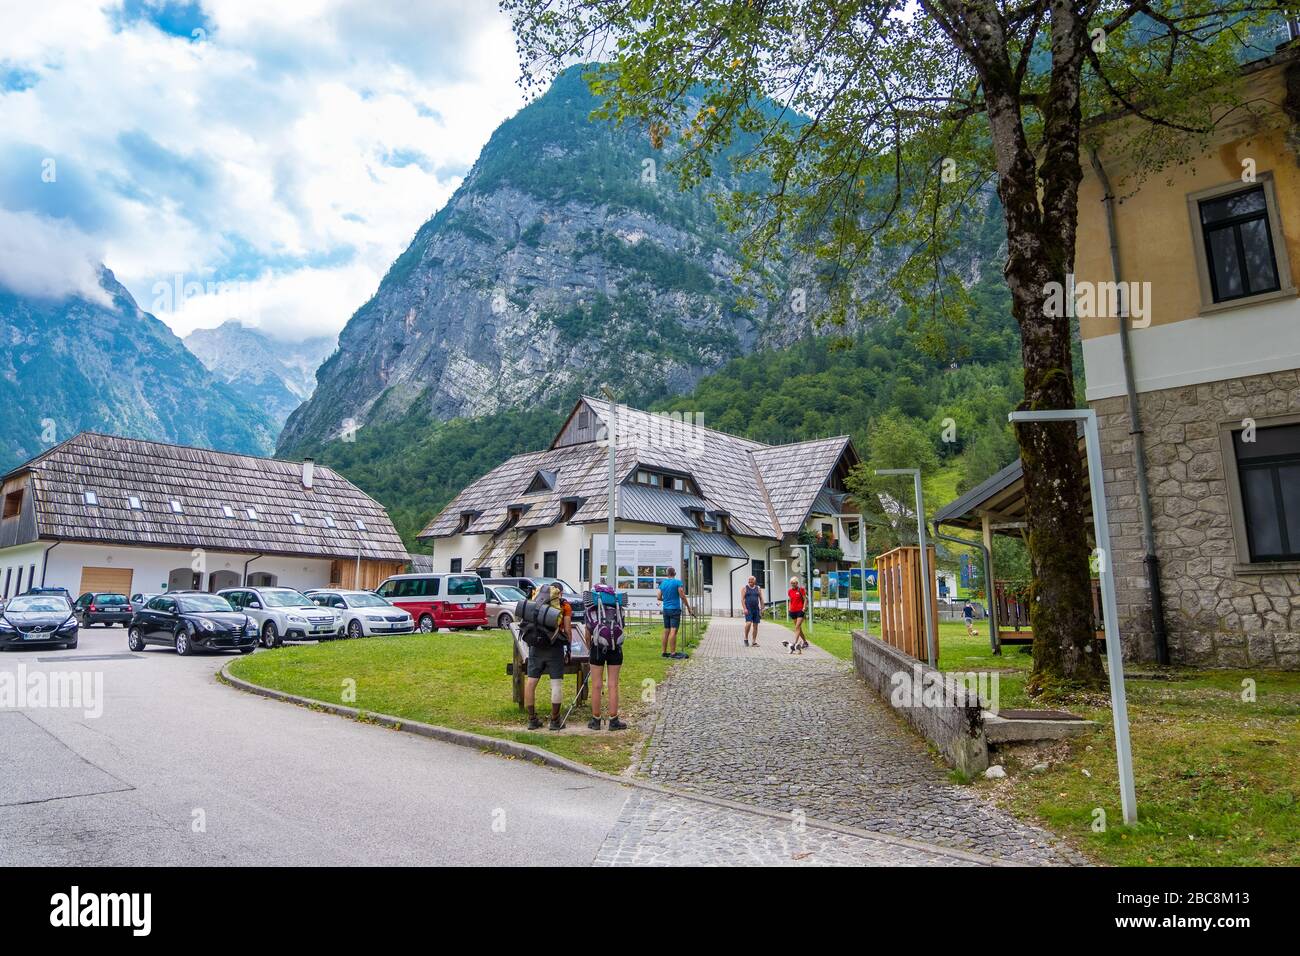 Bovec, Slovenia - August 11, 2019: Hikers in Small town Bovec in Julian Alps. Popular place for extreme sports and active recreation in Slovenia Stock Photo